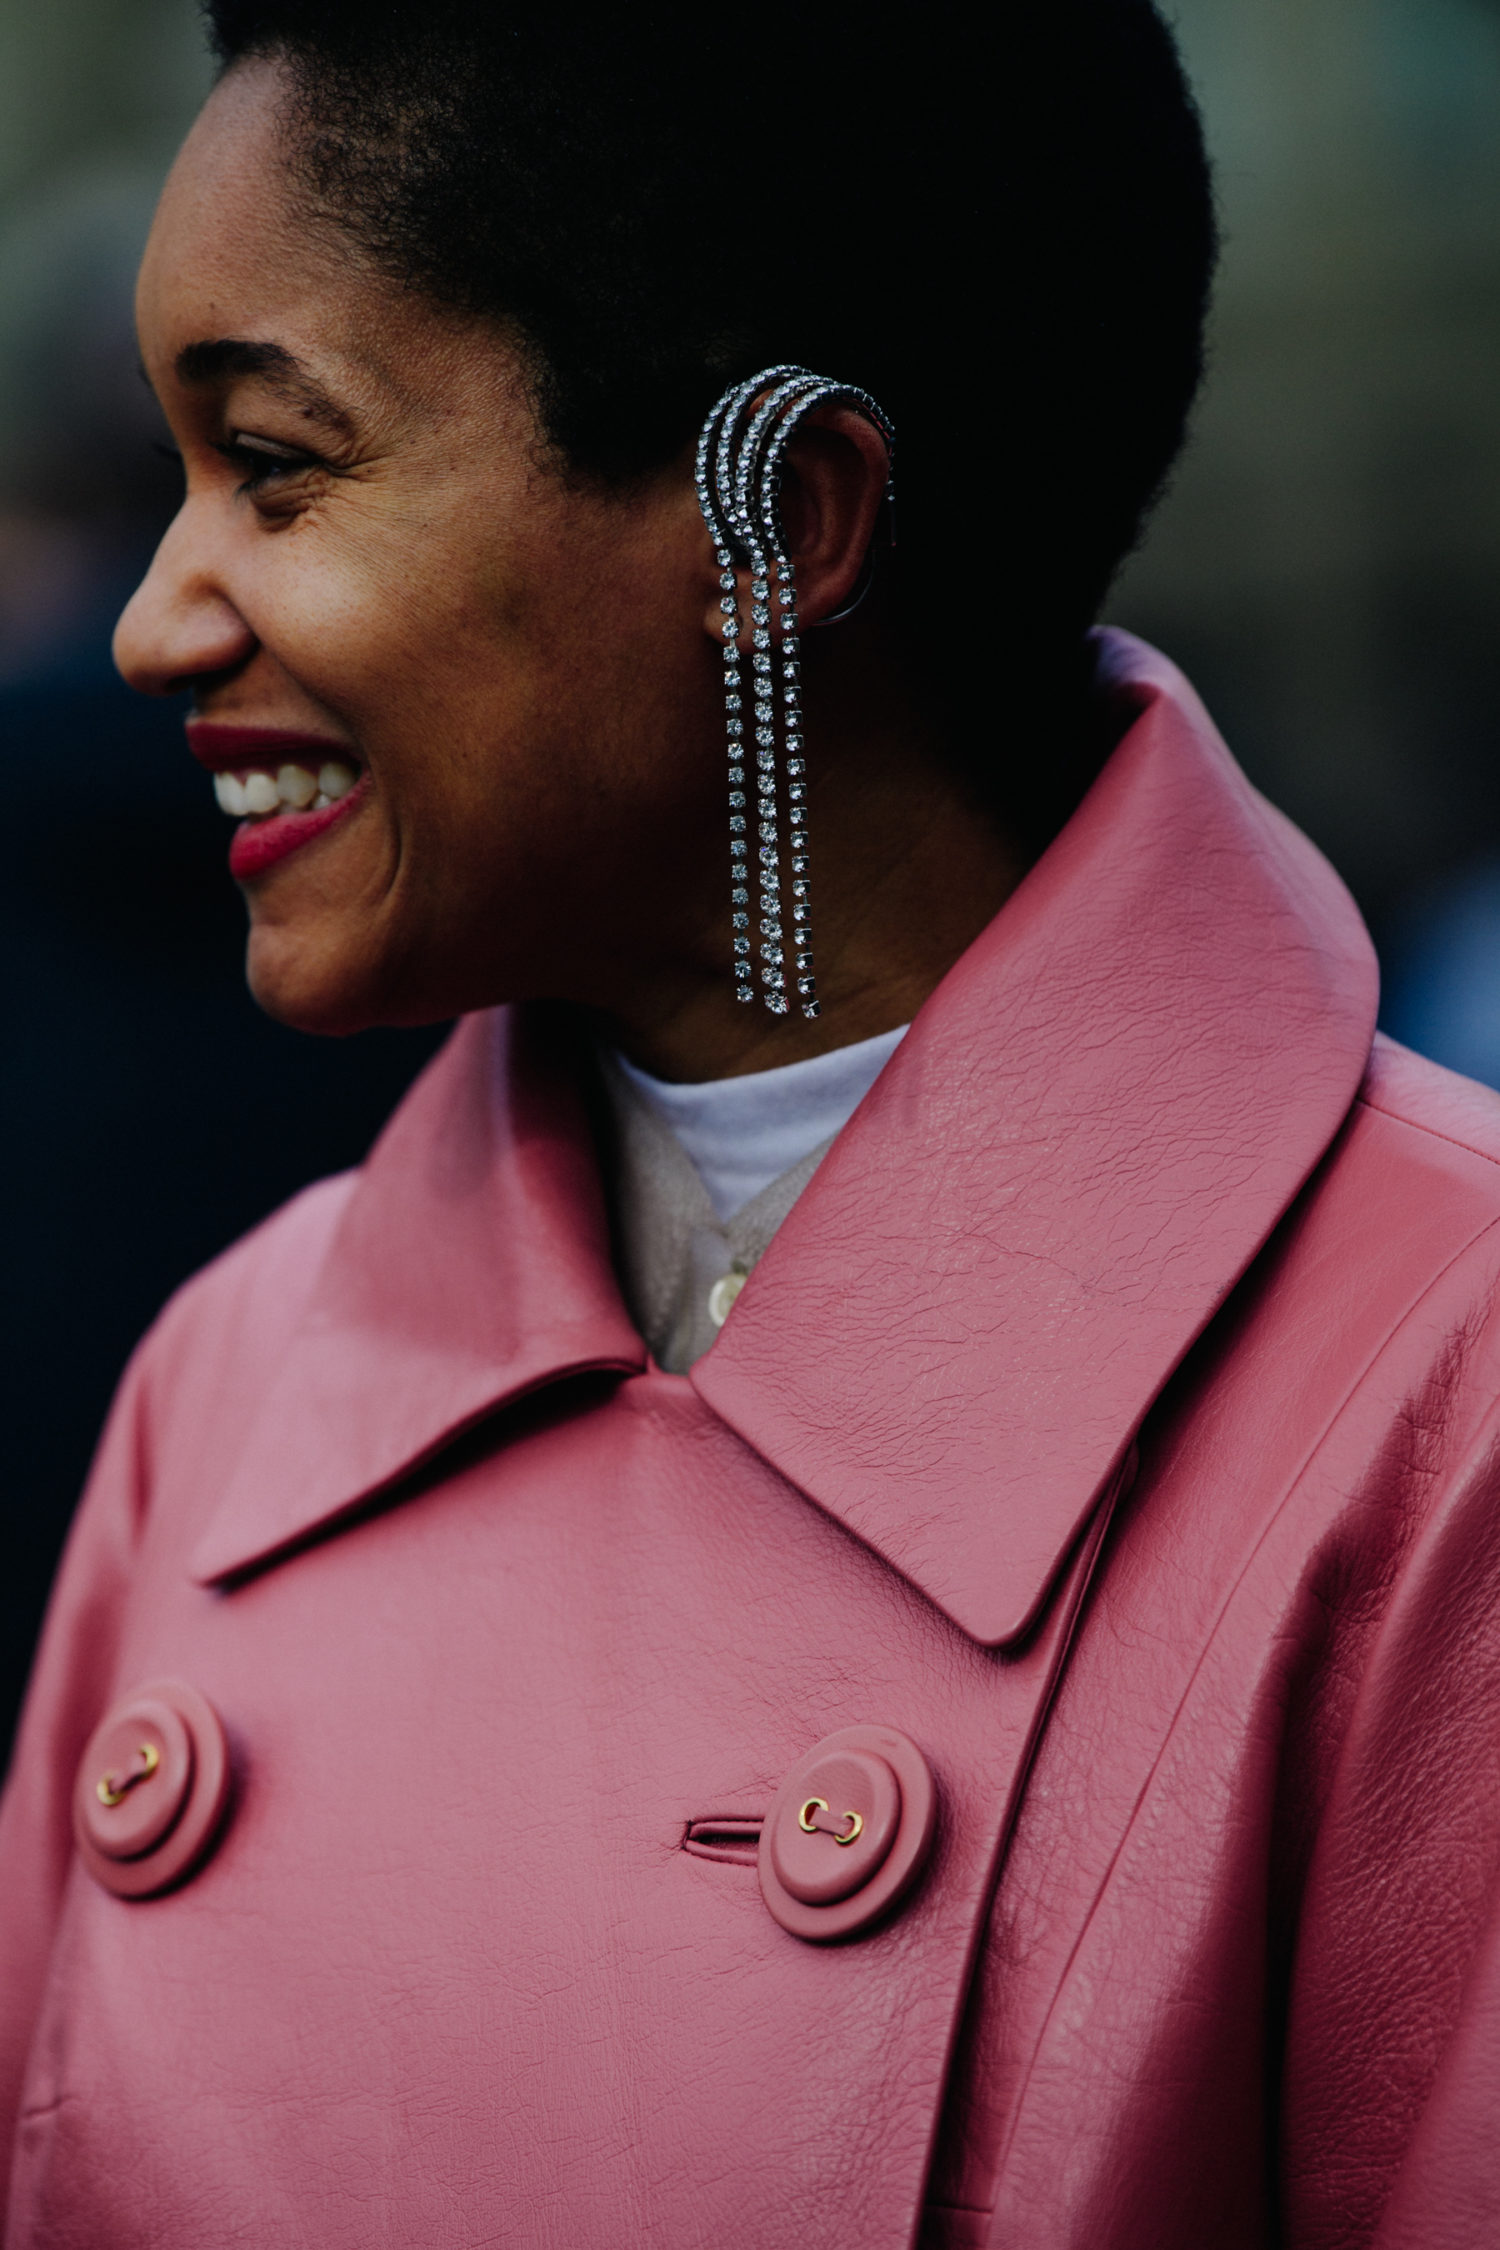 The Most Striking Crystal Embellished Earrings to Amp Up Your Winter Outfits